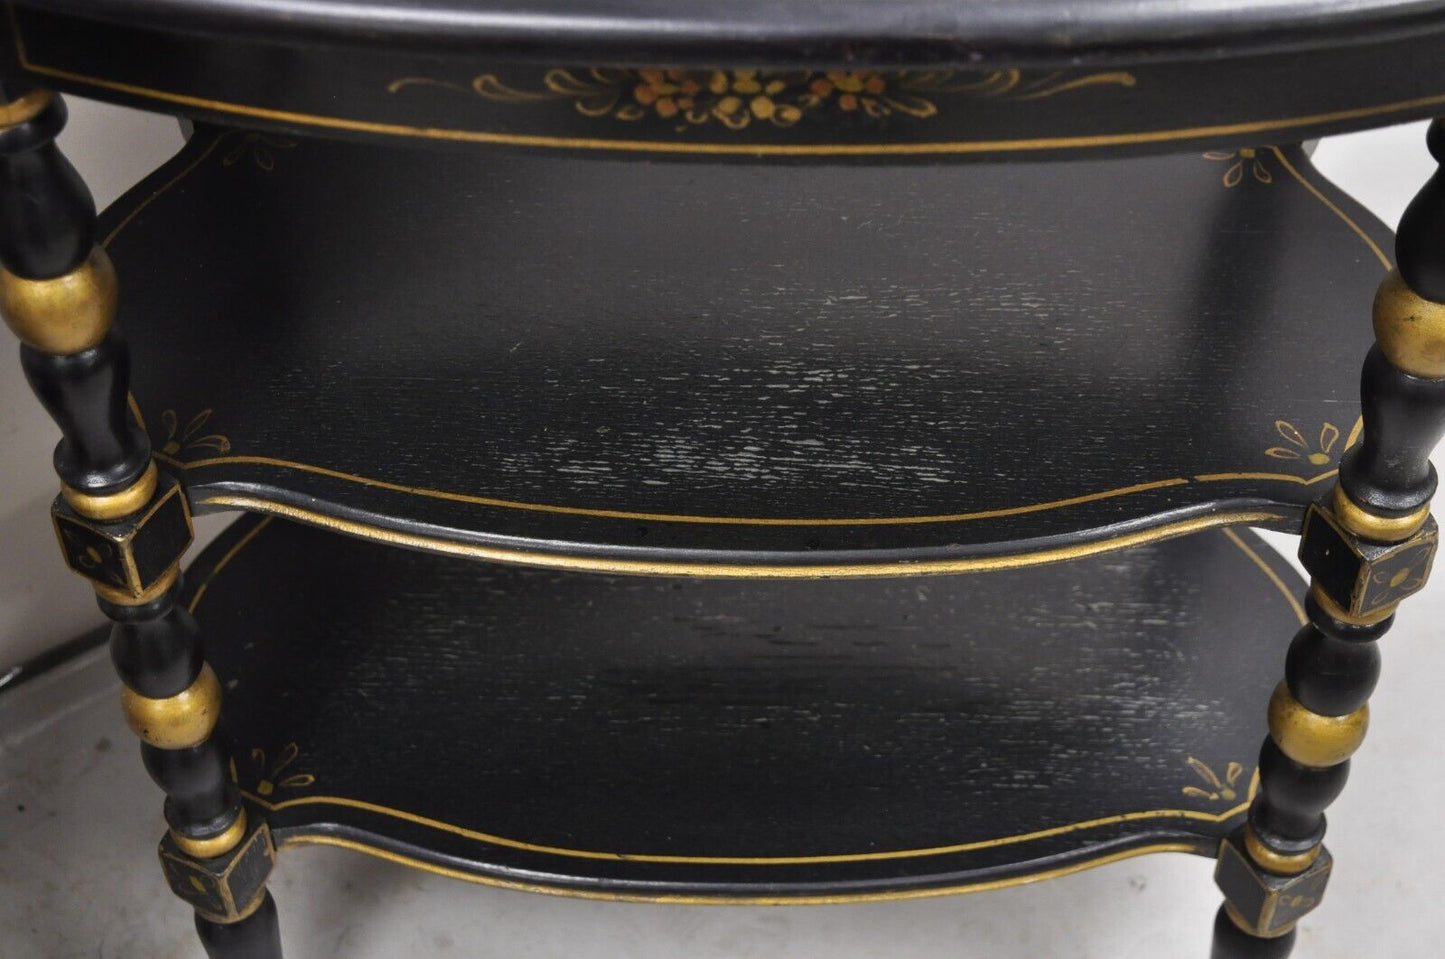 Vintage Chinoiserie Black Painted Oval 3 Tier Side Tables by Yeager - a Pair